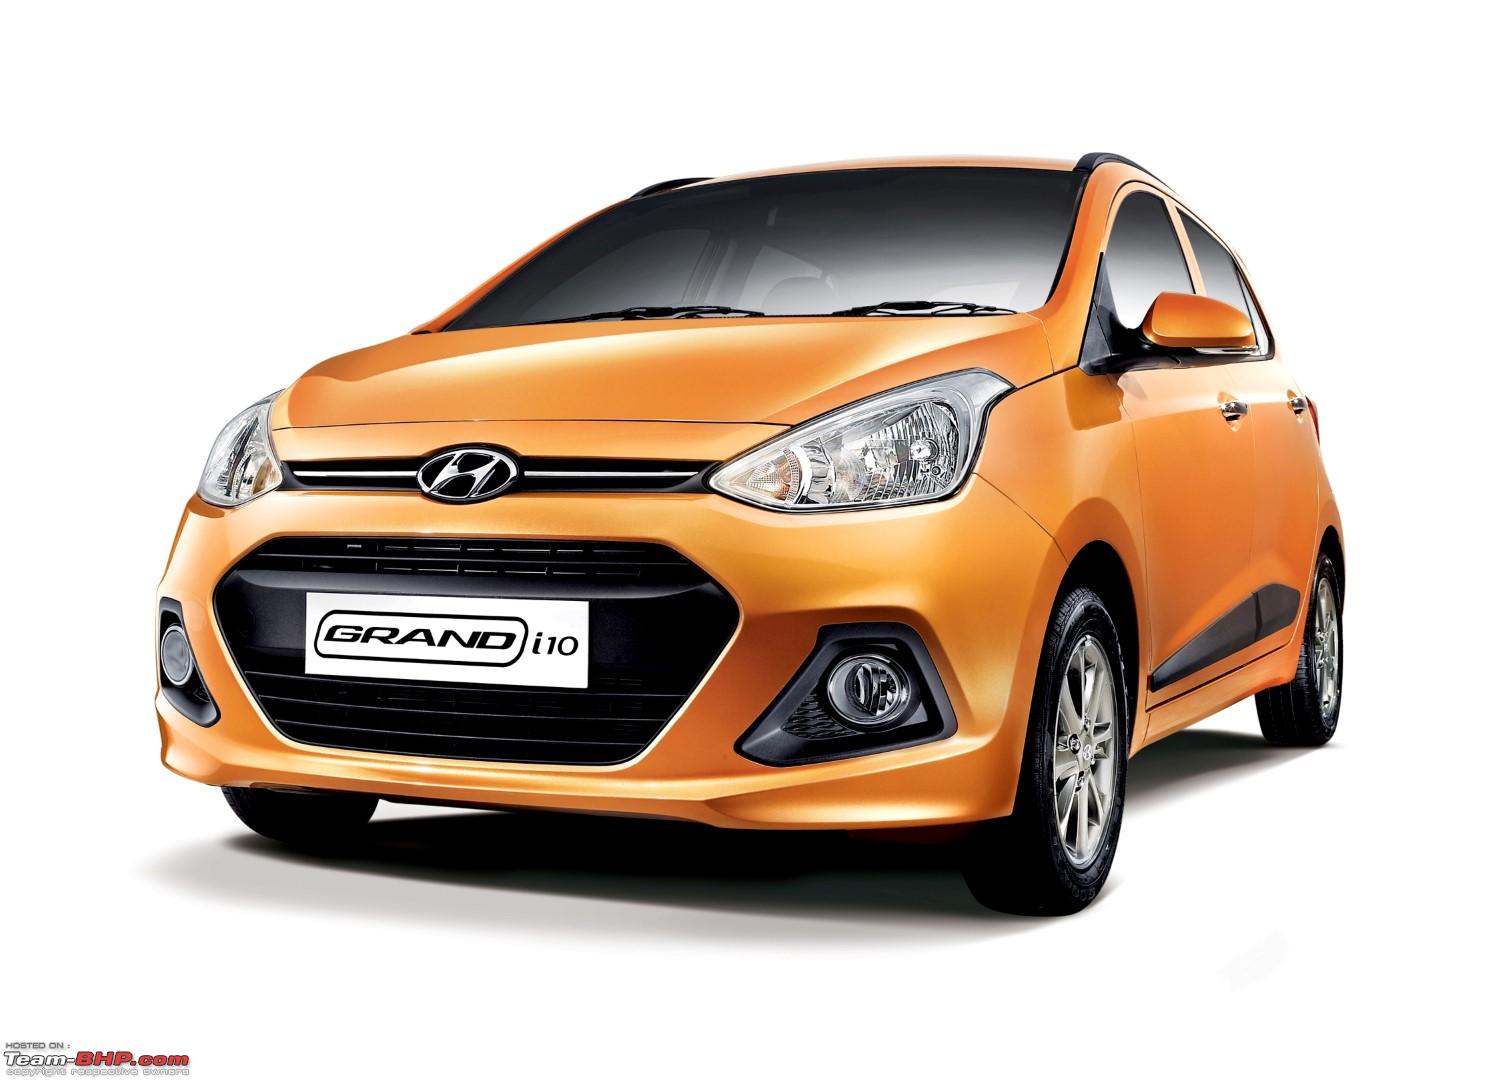 Grand I10 Wallpapers | Best HD Wallpapers